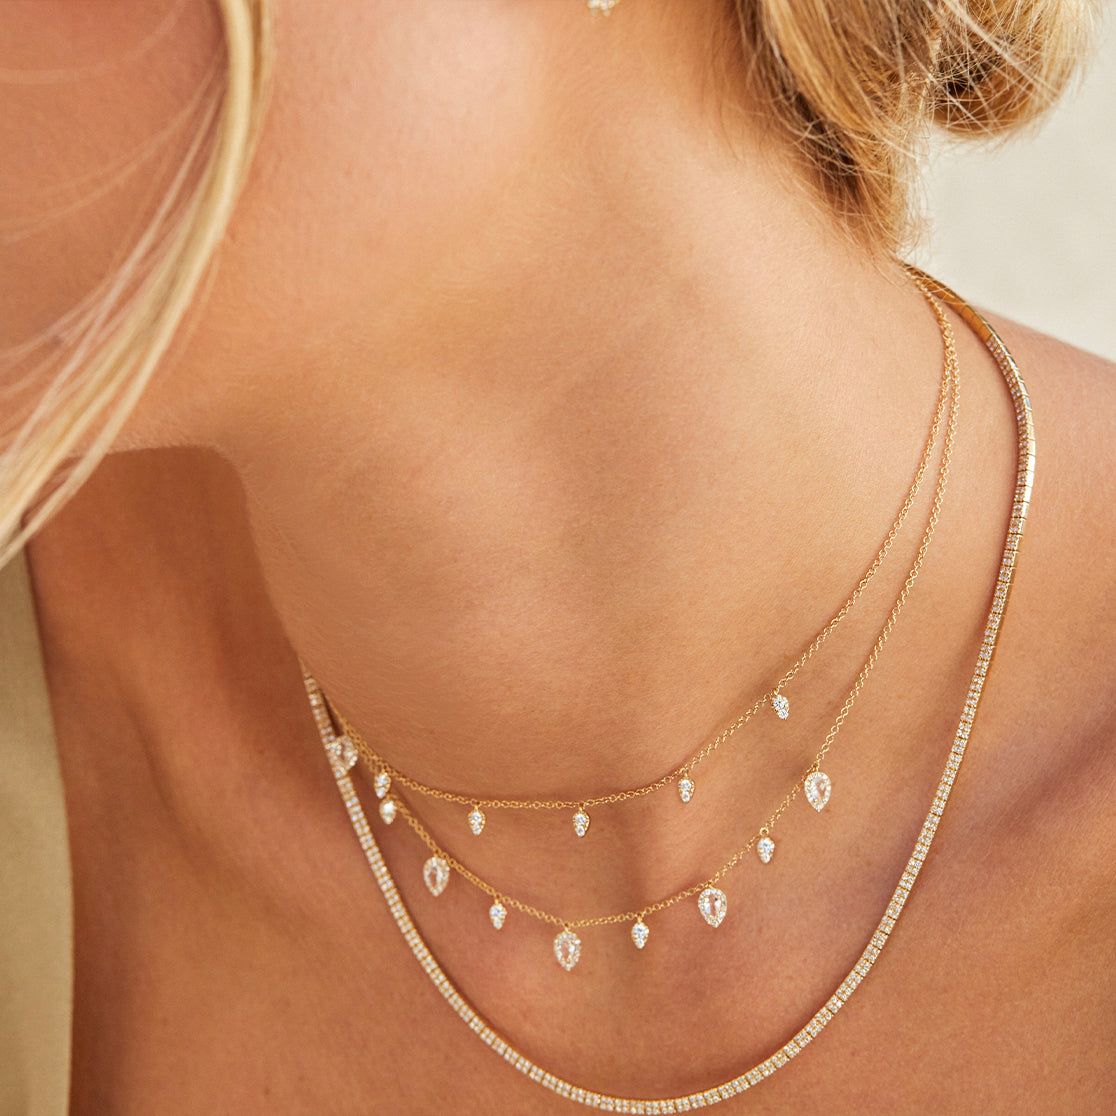 Diamond & White Quartz Ultimate Teardrop NecklaceDiamond & White Quartz Ultimate Teardrop Necklace in 14k yellow gold styled on neck of model with additional teardrop necklace and diamond segment necklace